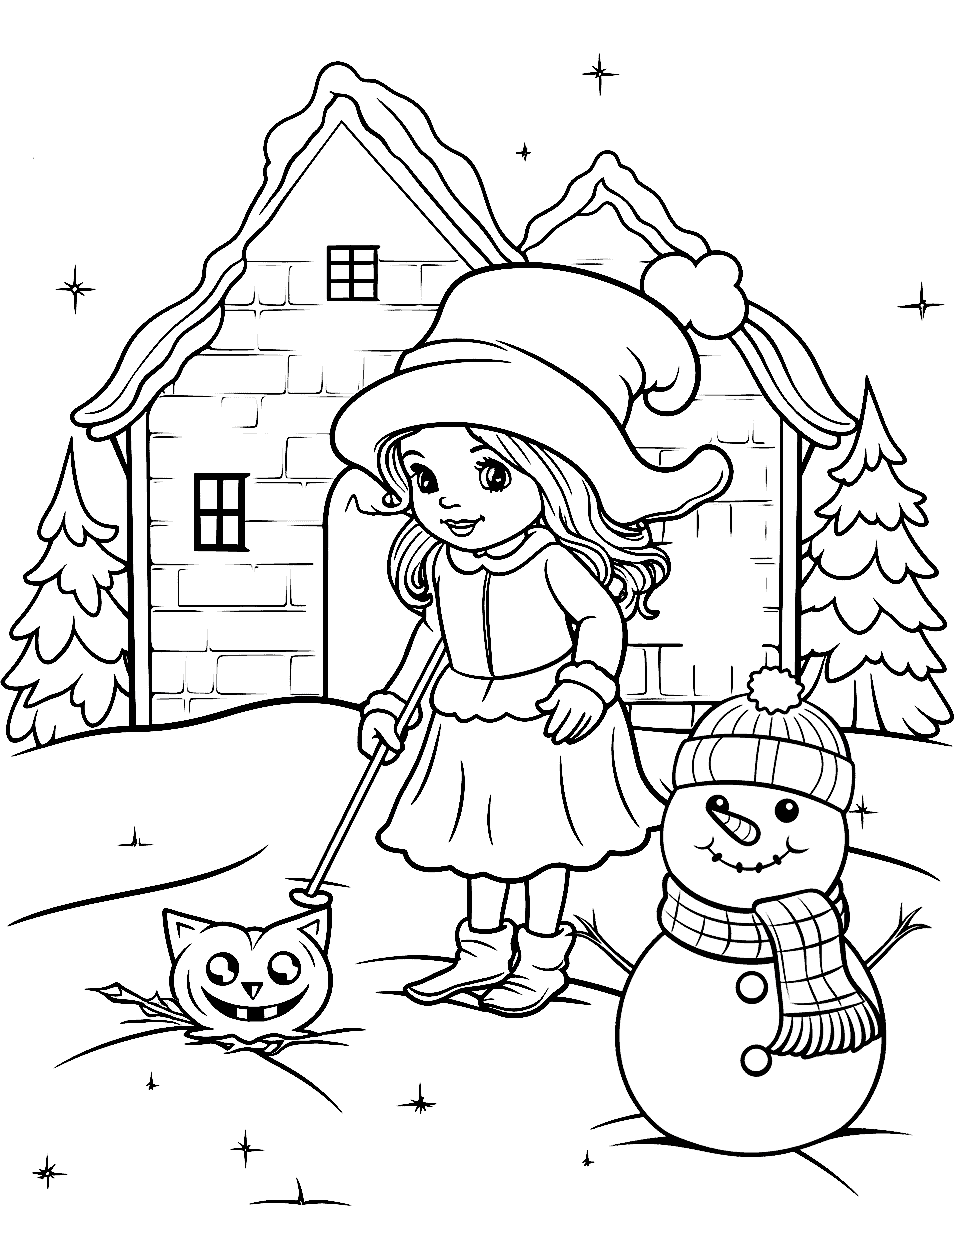 Little Witch's Winter Wonderland Witch Coloring Page - A little playing in a snowy landscape.